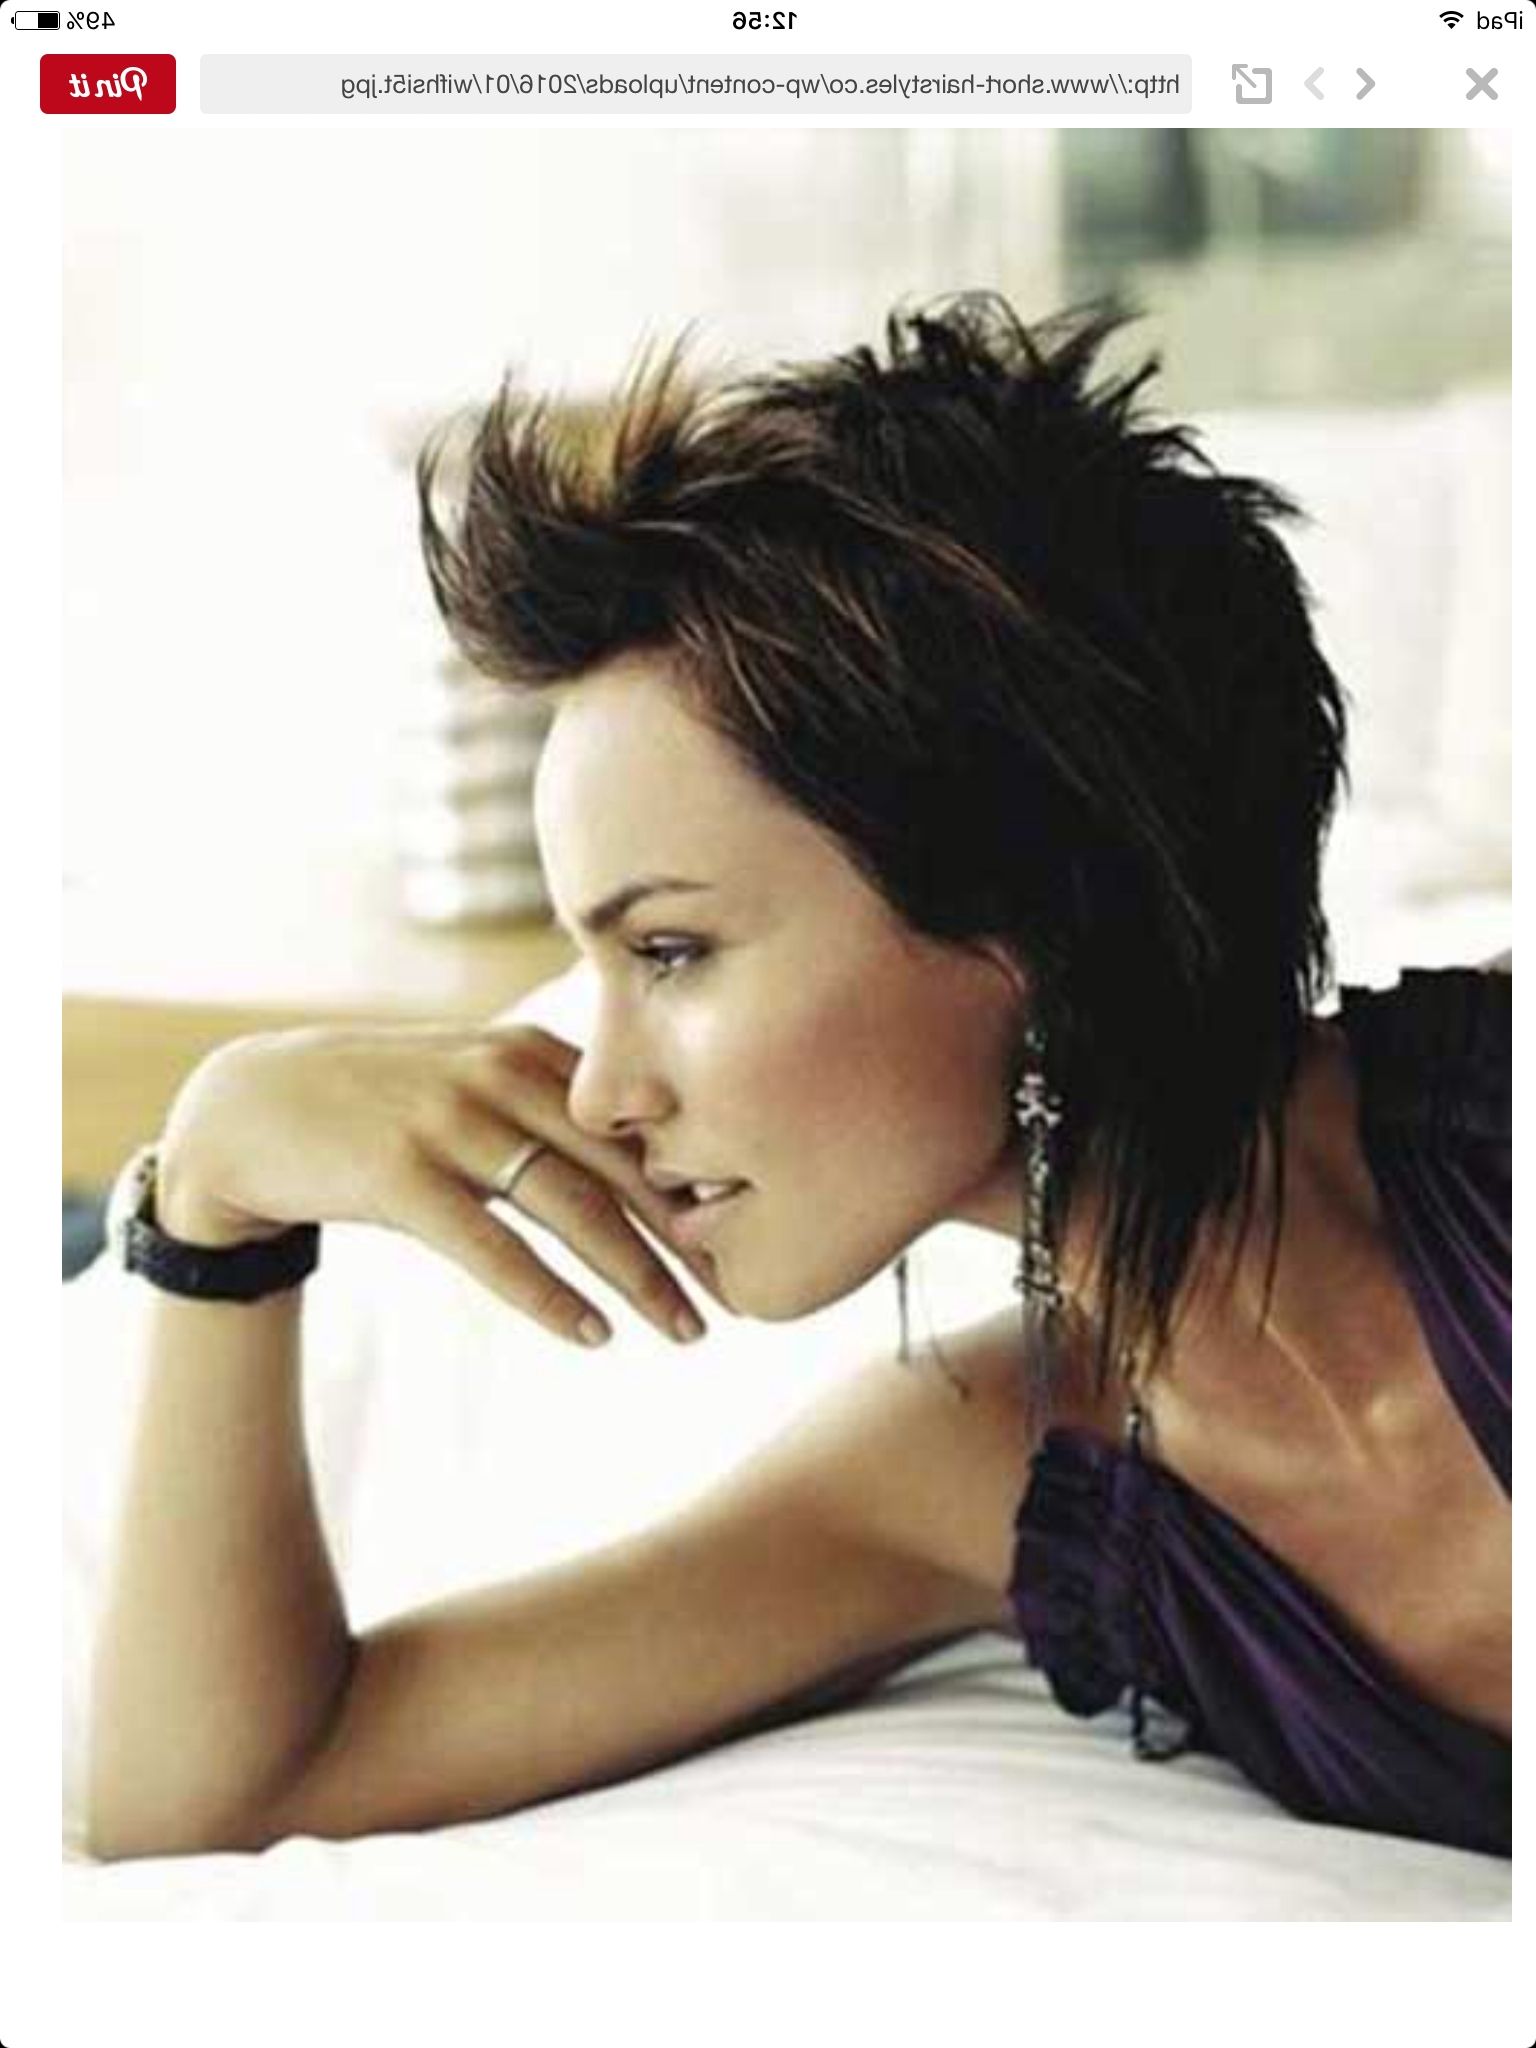 Pindiana Bogie On Hair | Pinterest In Recent Rocker Pixie Haircuts (View 12 of 15)